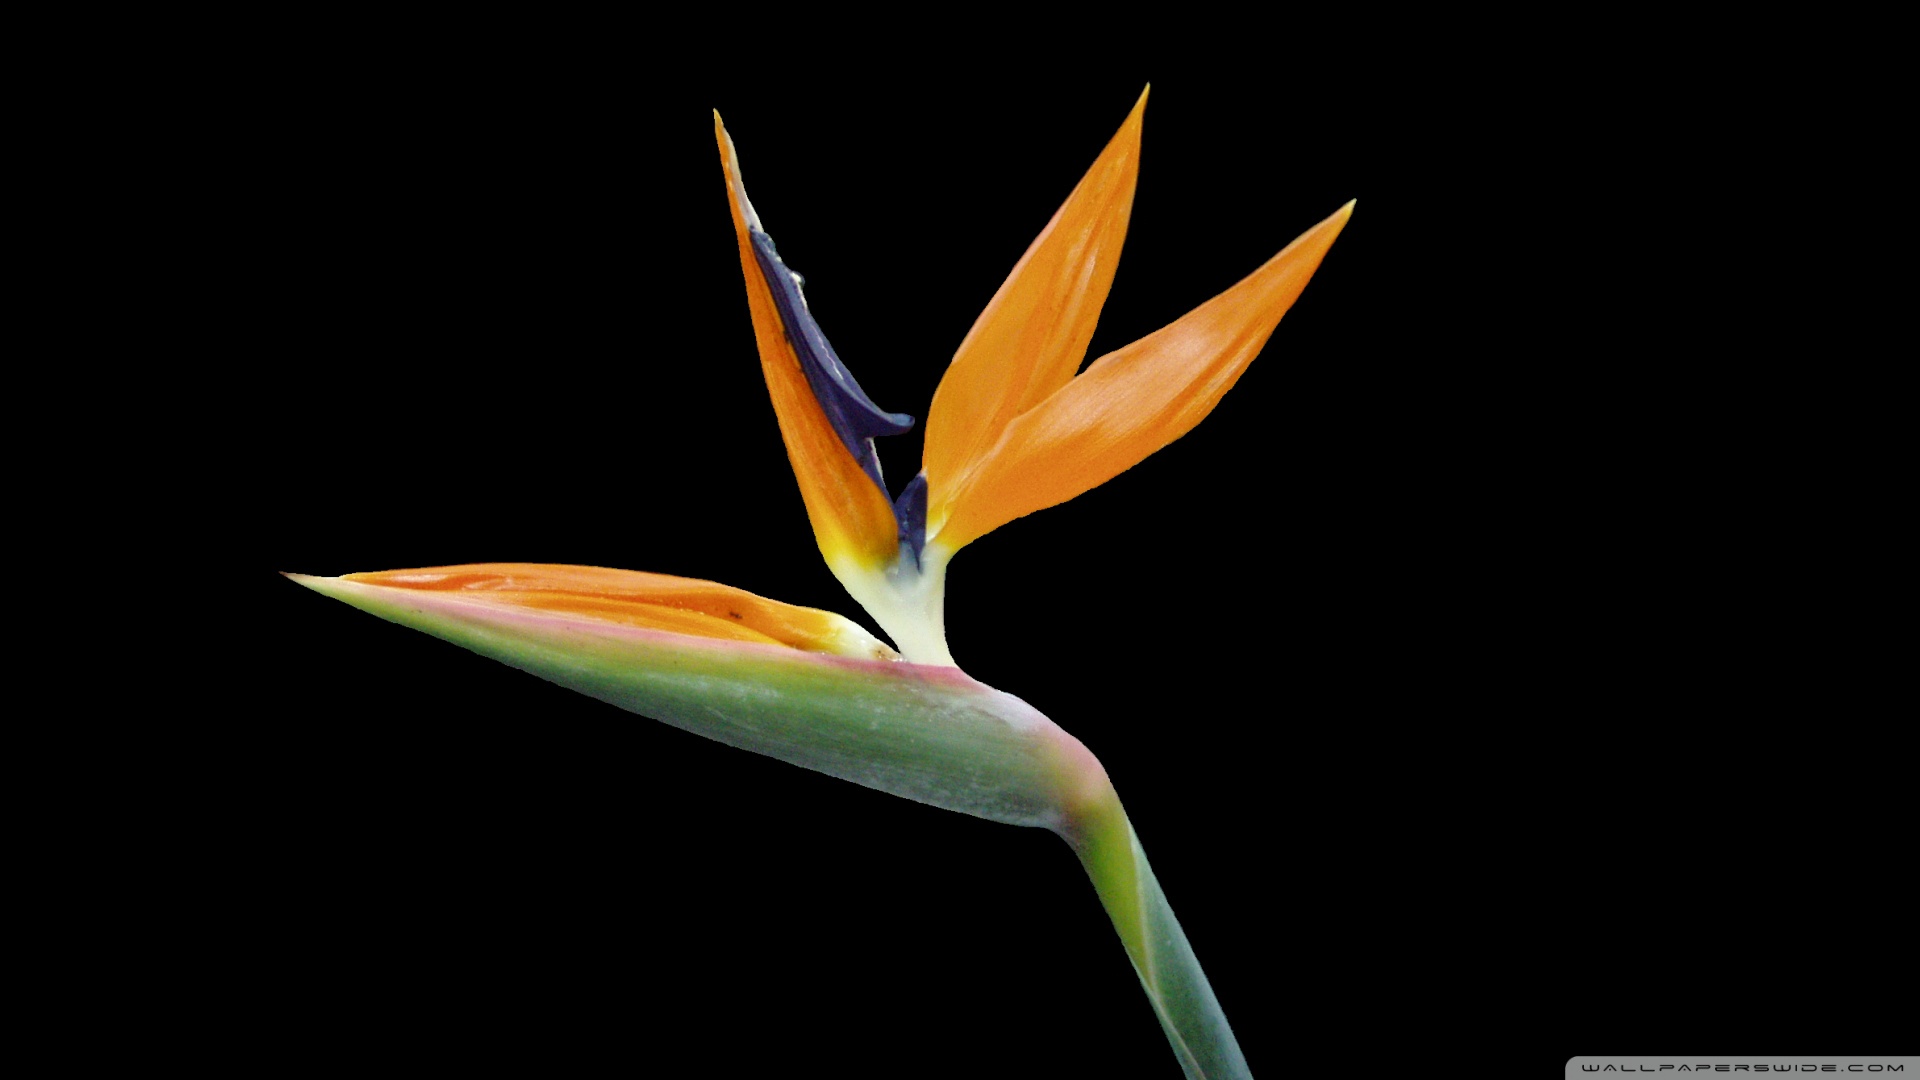 Bird Of Paradise Flower wallpapers HD free   414797